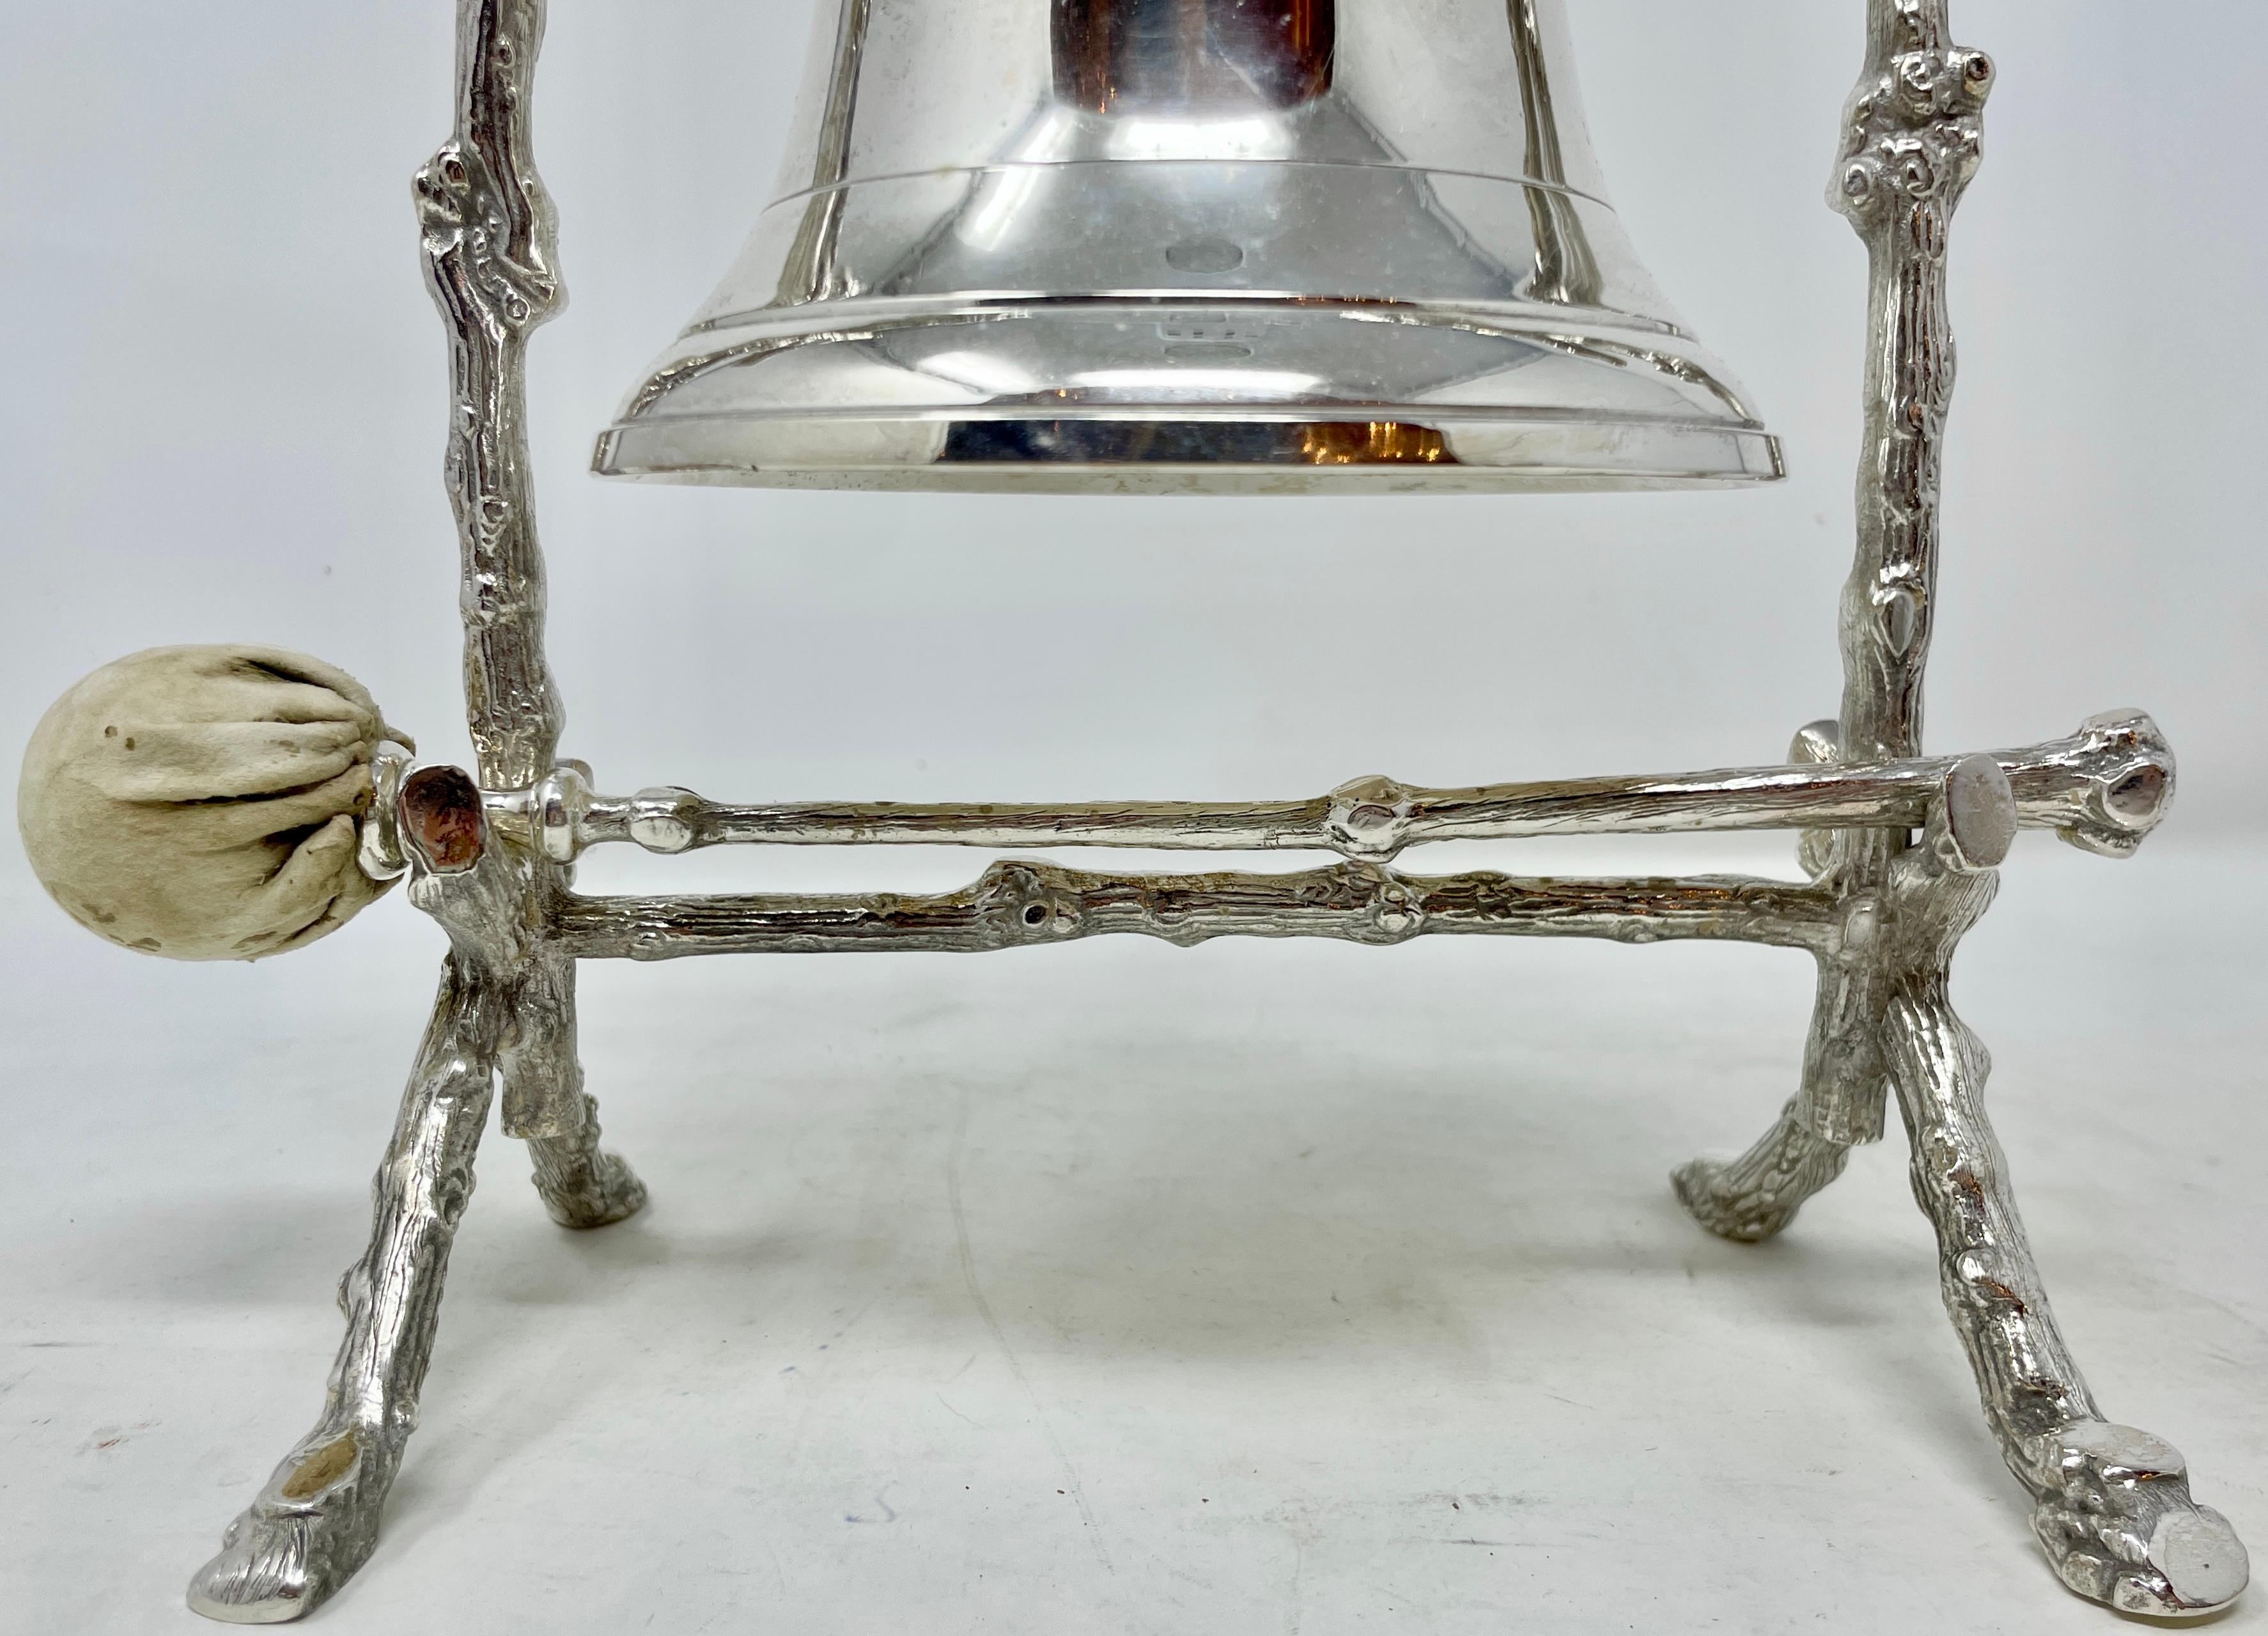 Antique English sheffield silver-plated dinner bell with striker, circa 1880-1890.